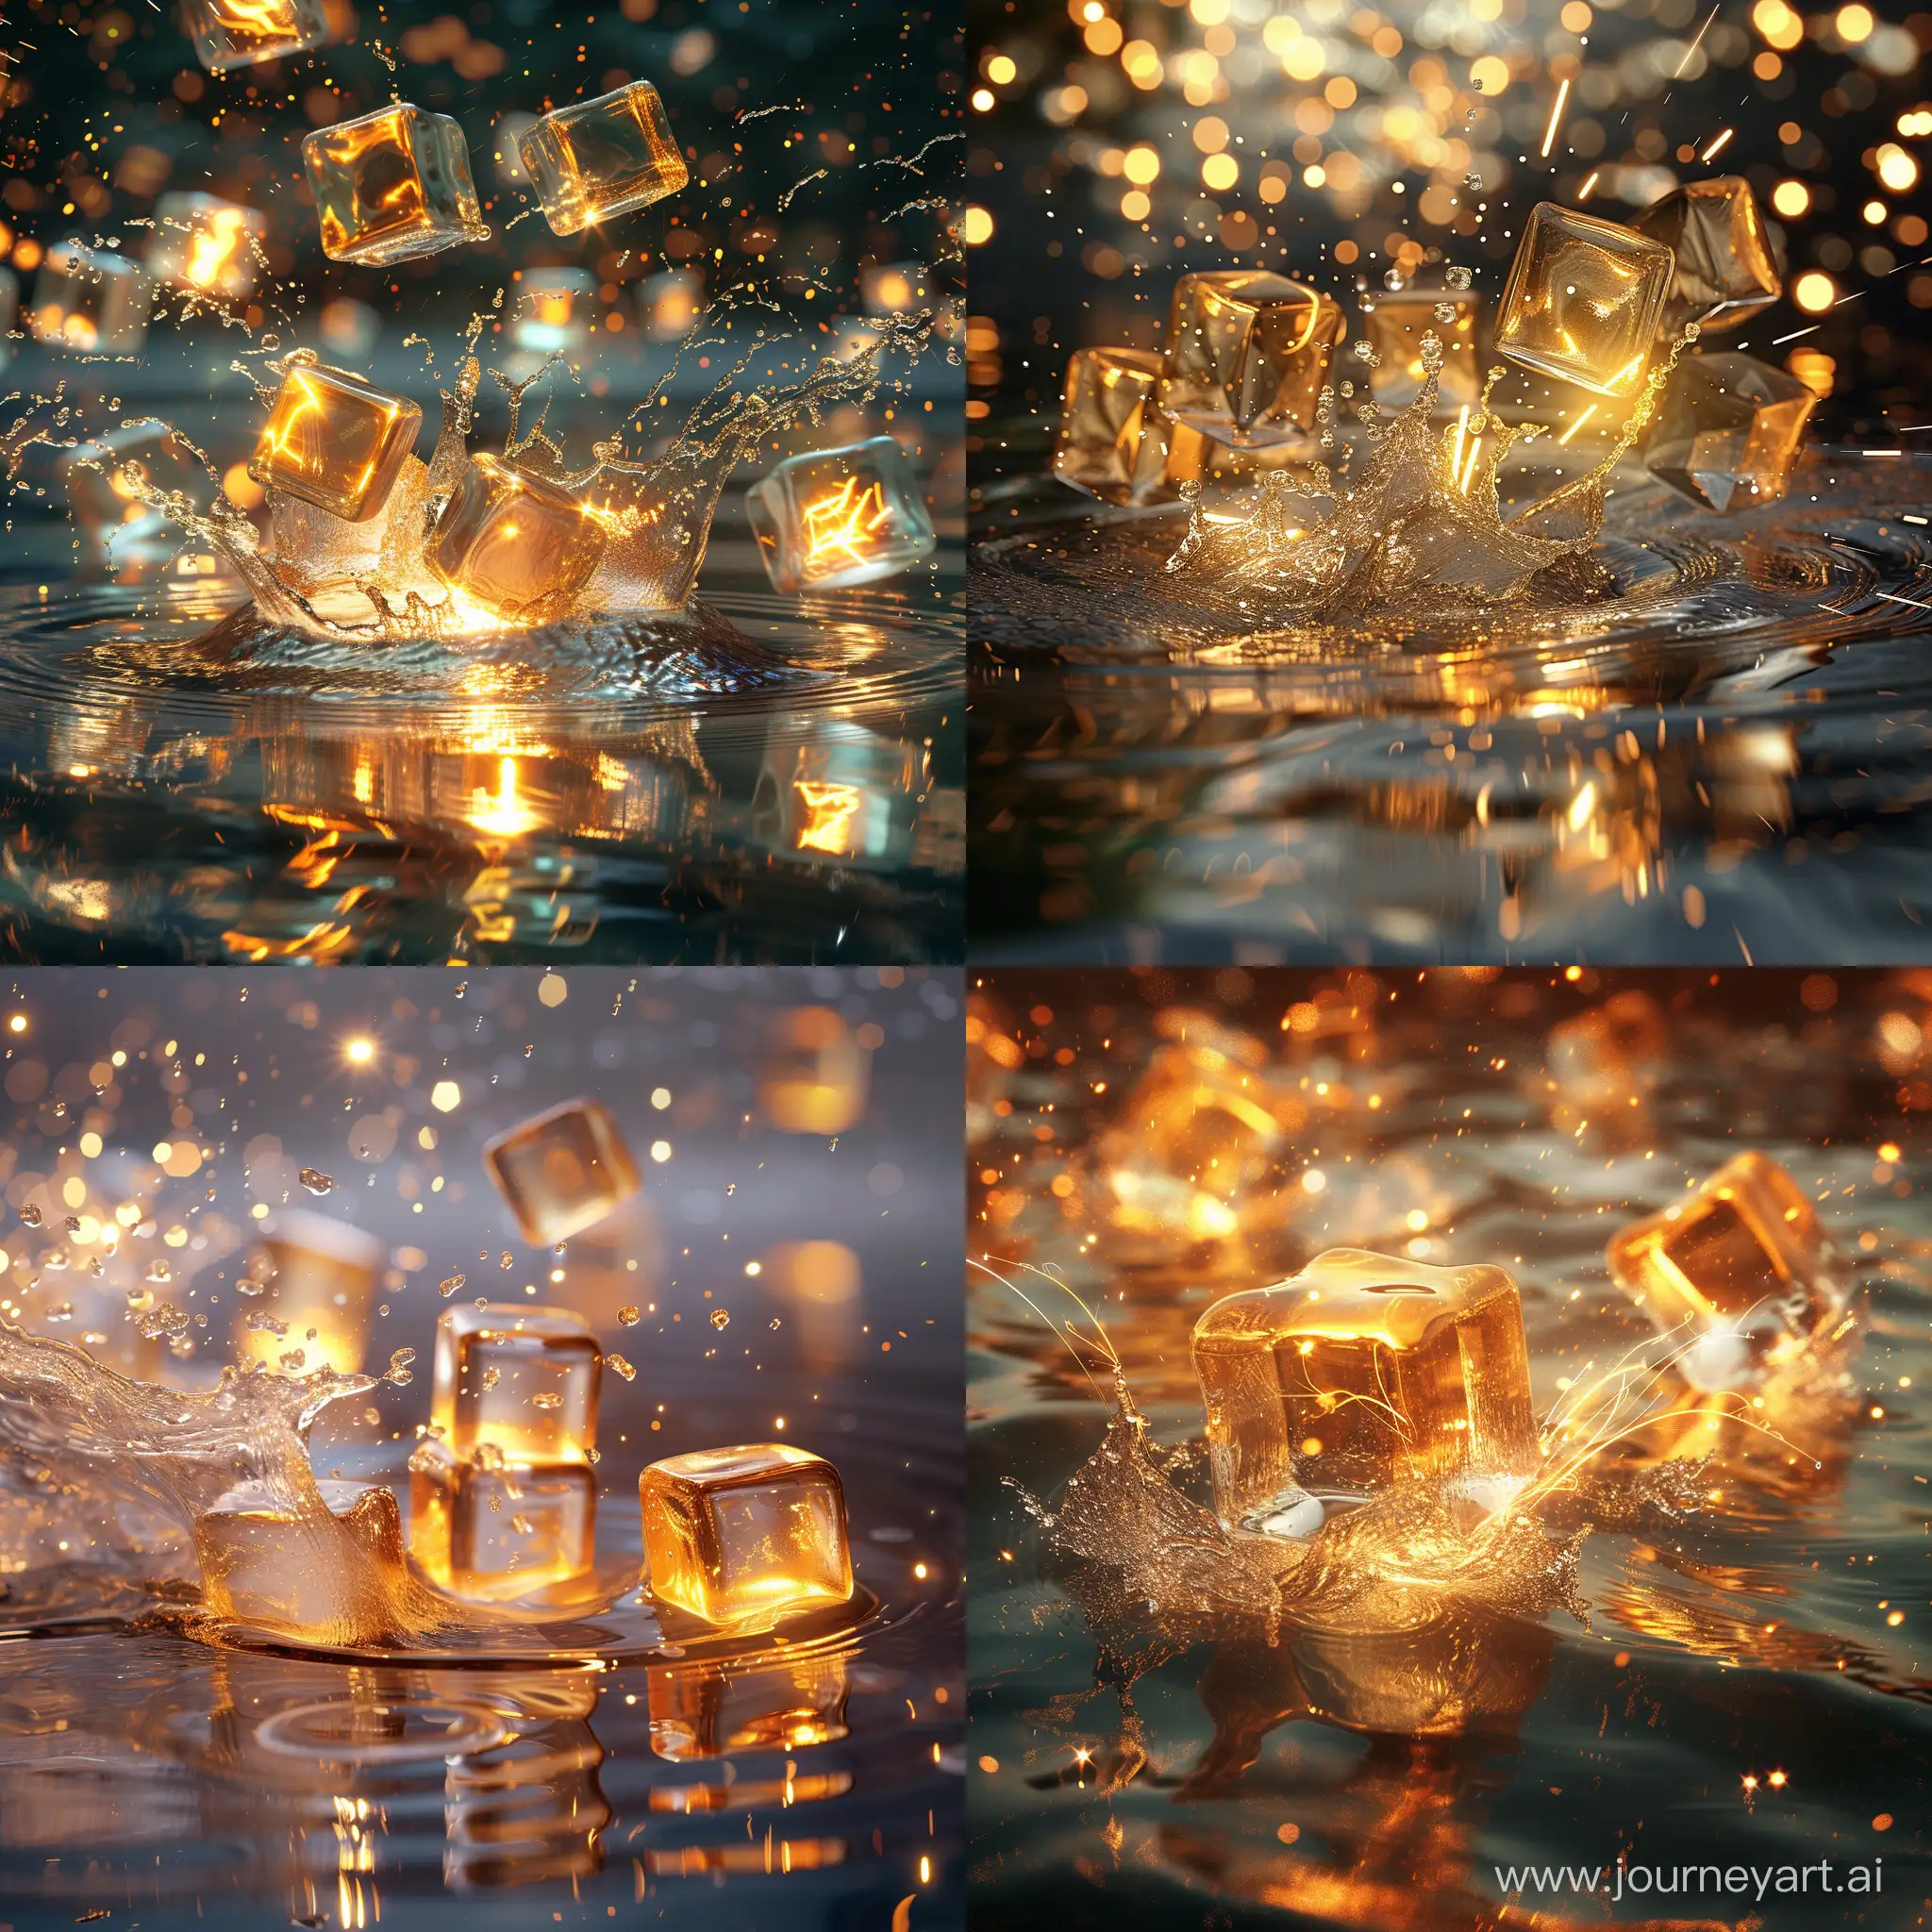 Golden-Glowing-Ice-Cubes-Sparkling-on-Dynamic-Water-Surface